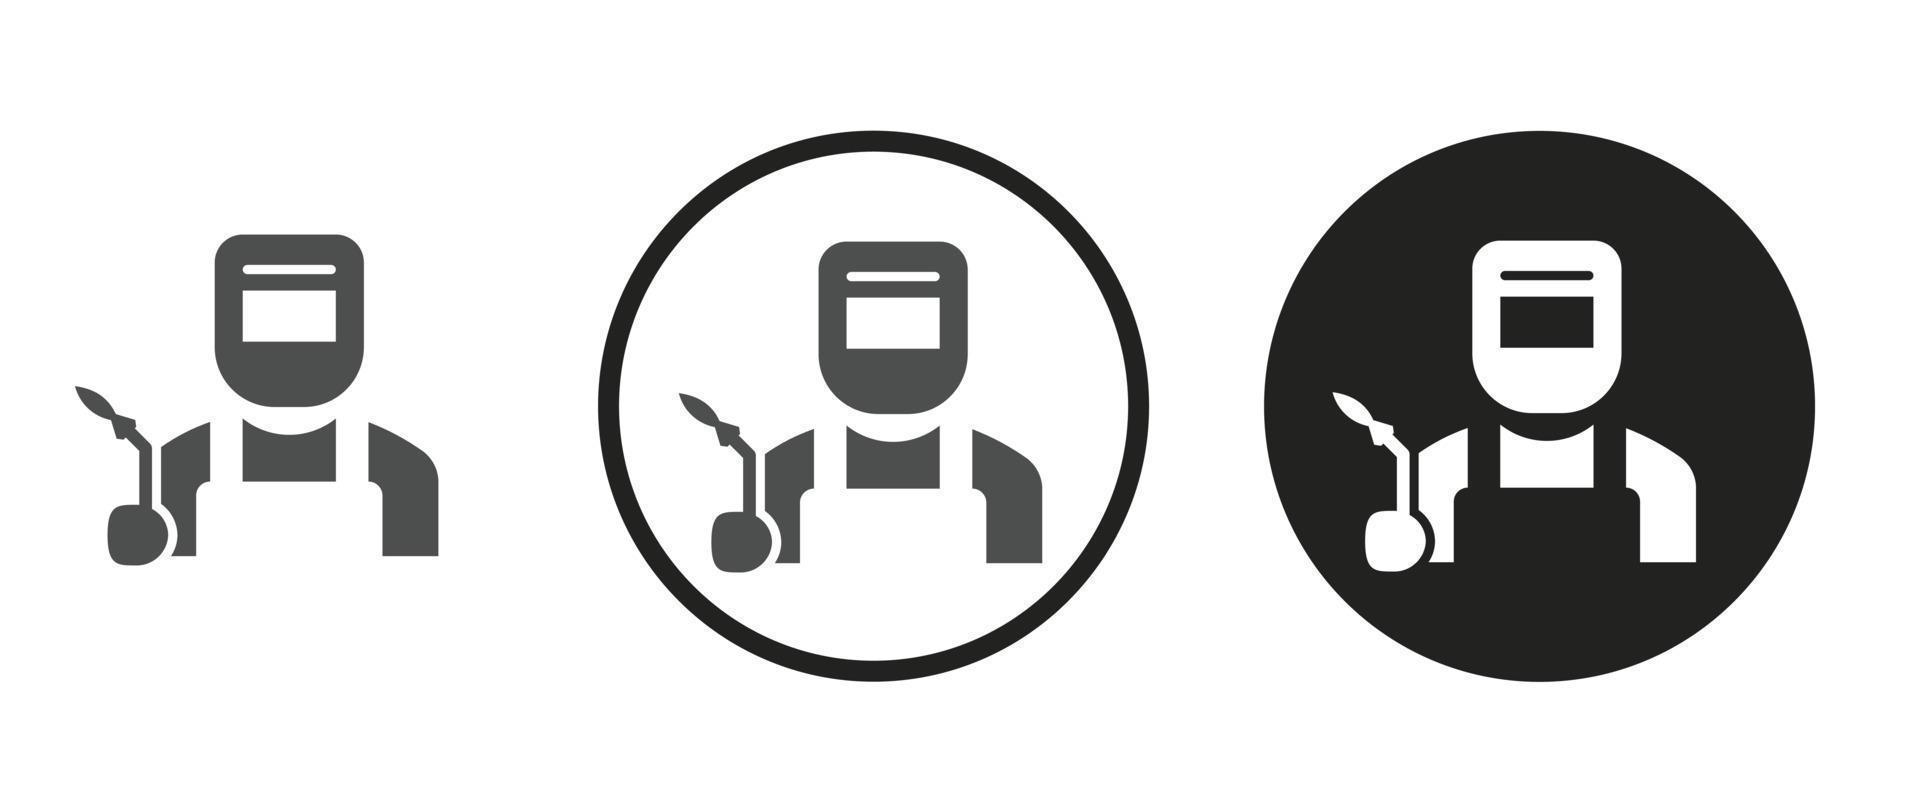 Welder icon . web icon set . icons collection. Simple vector illustration.